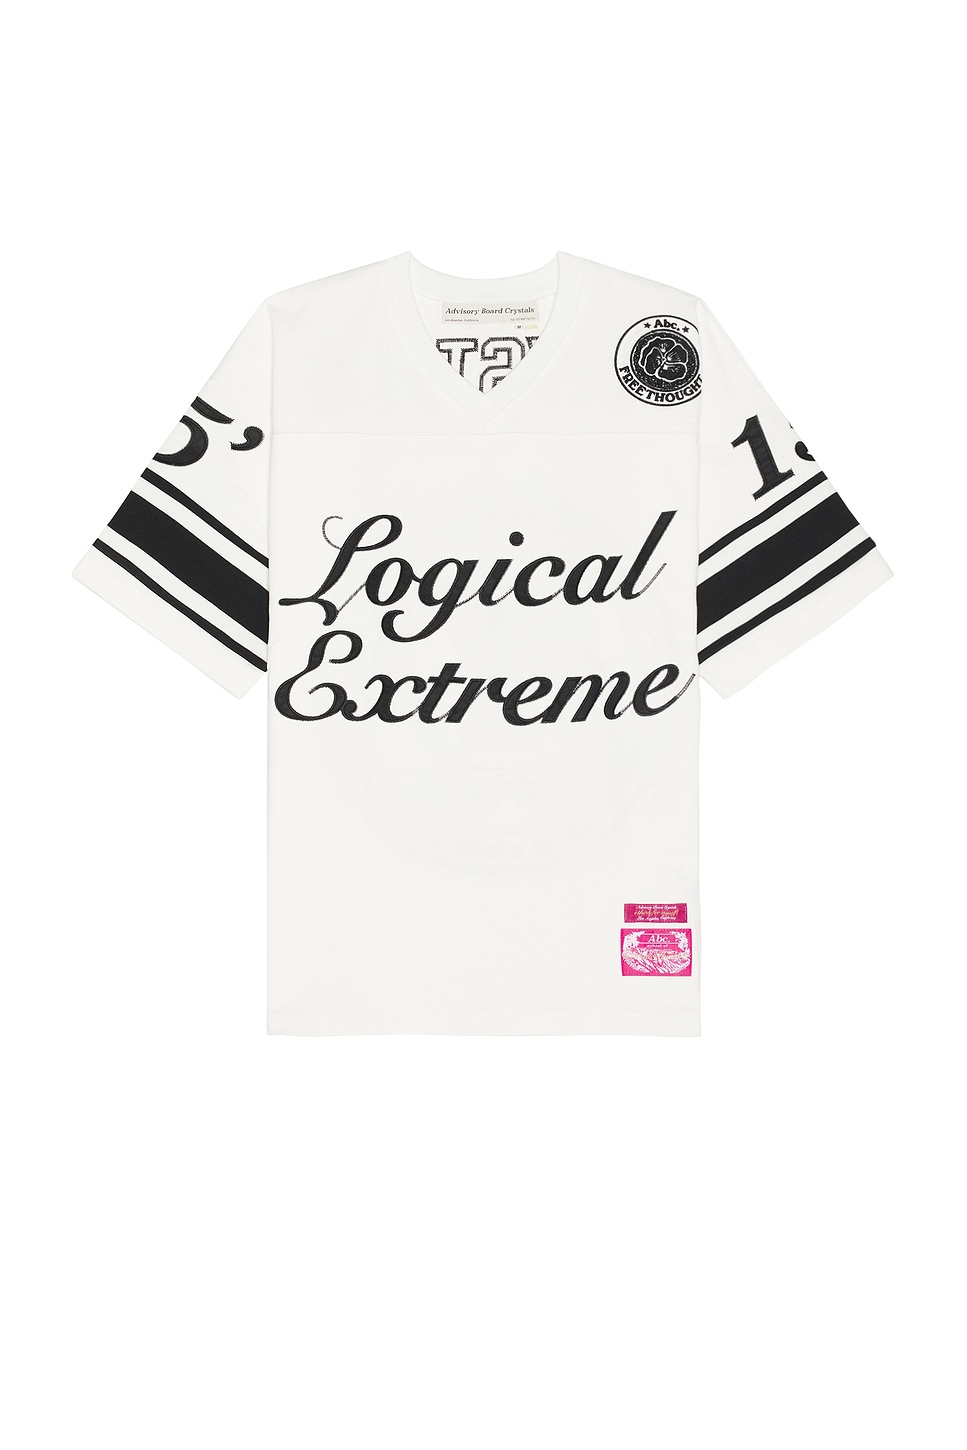 Shop Advisory Board Crystals Logical Extreme Rugby Shirt In White